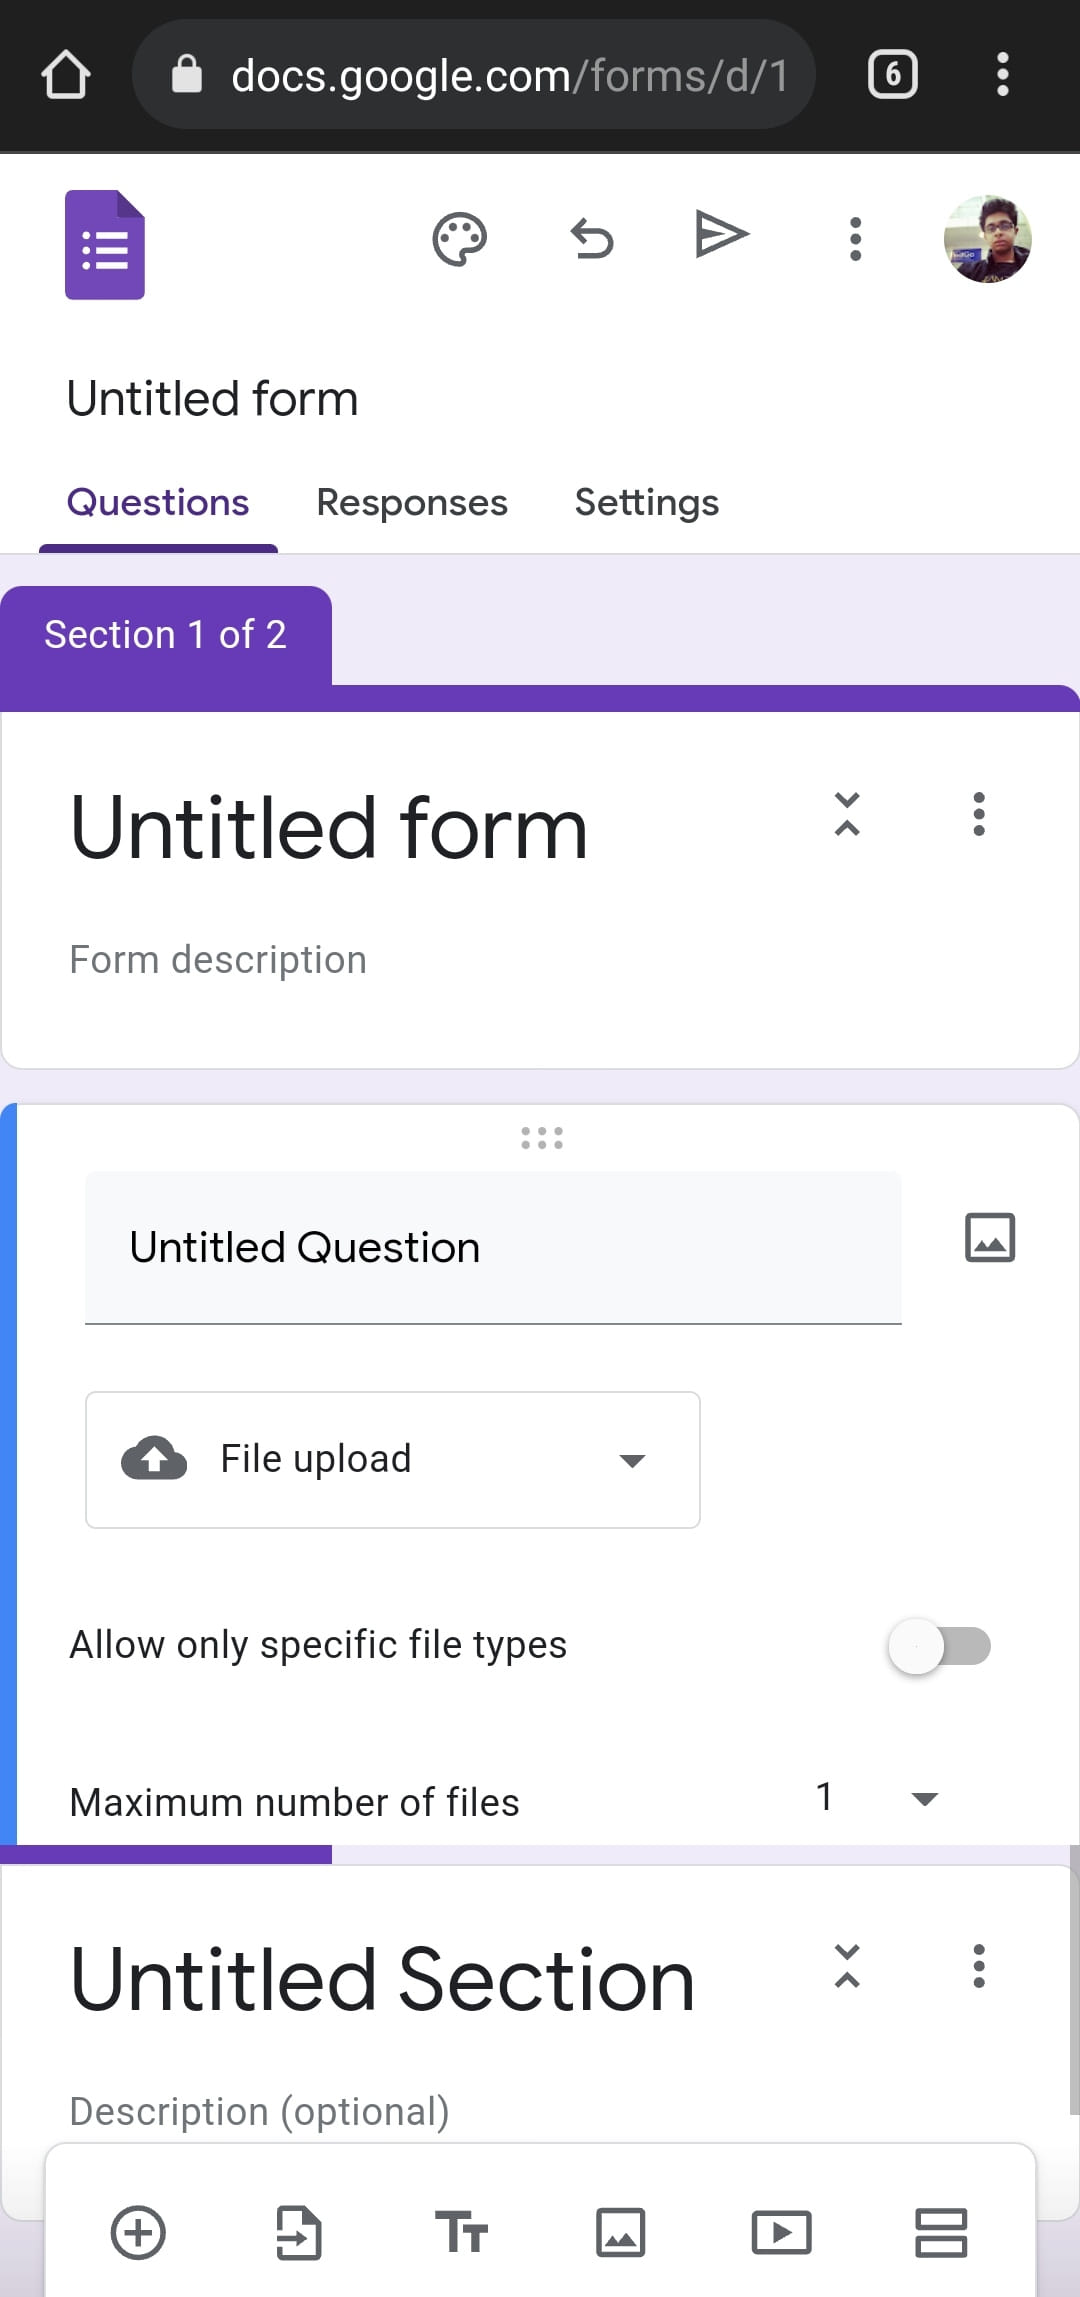 Google Forms doesn't come in the form of an app, but it works fine on browsers on mobile devices